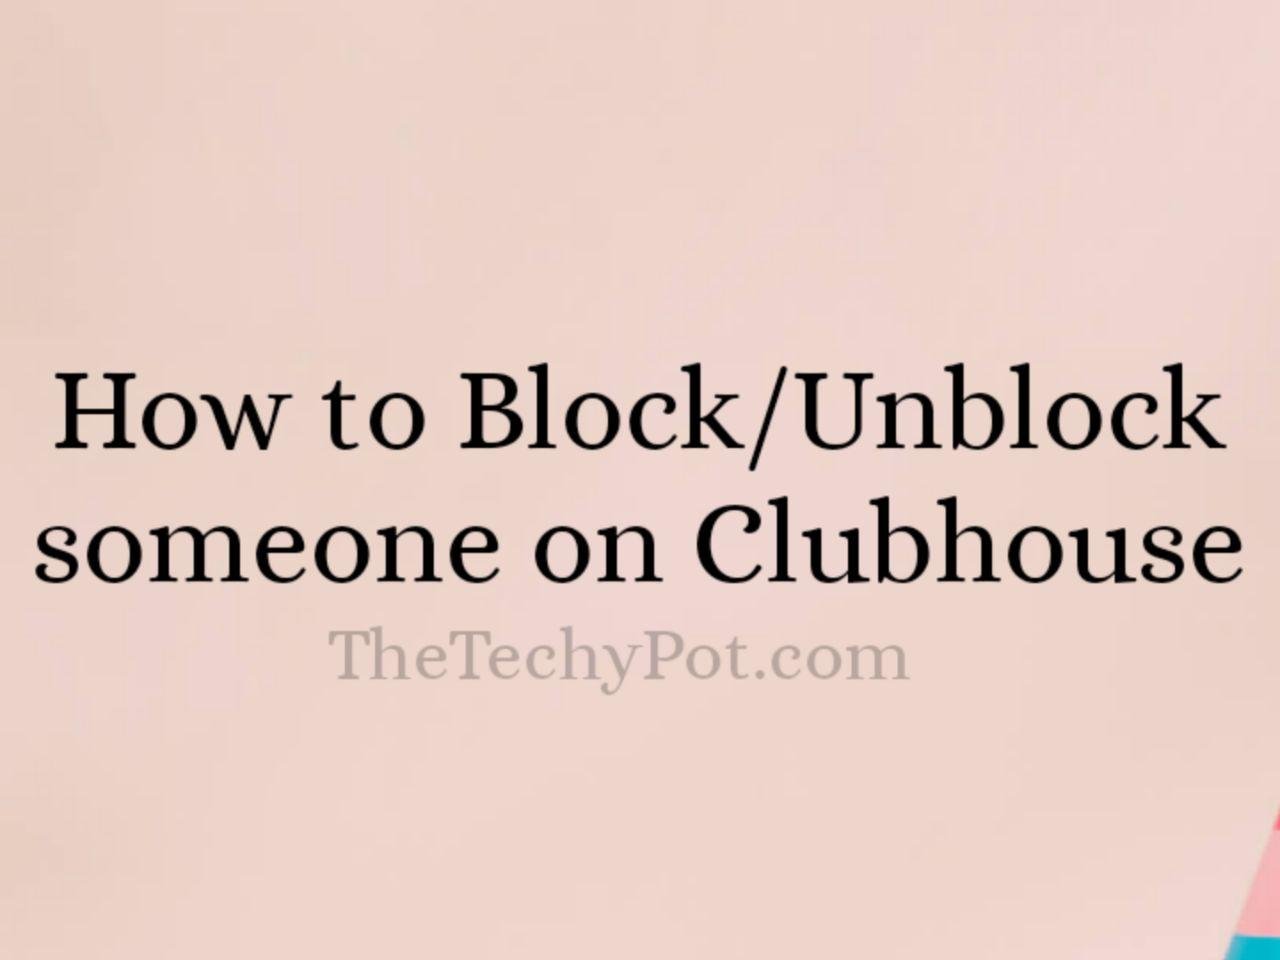 How to Block or Unblock someone on Clubhouse social app